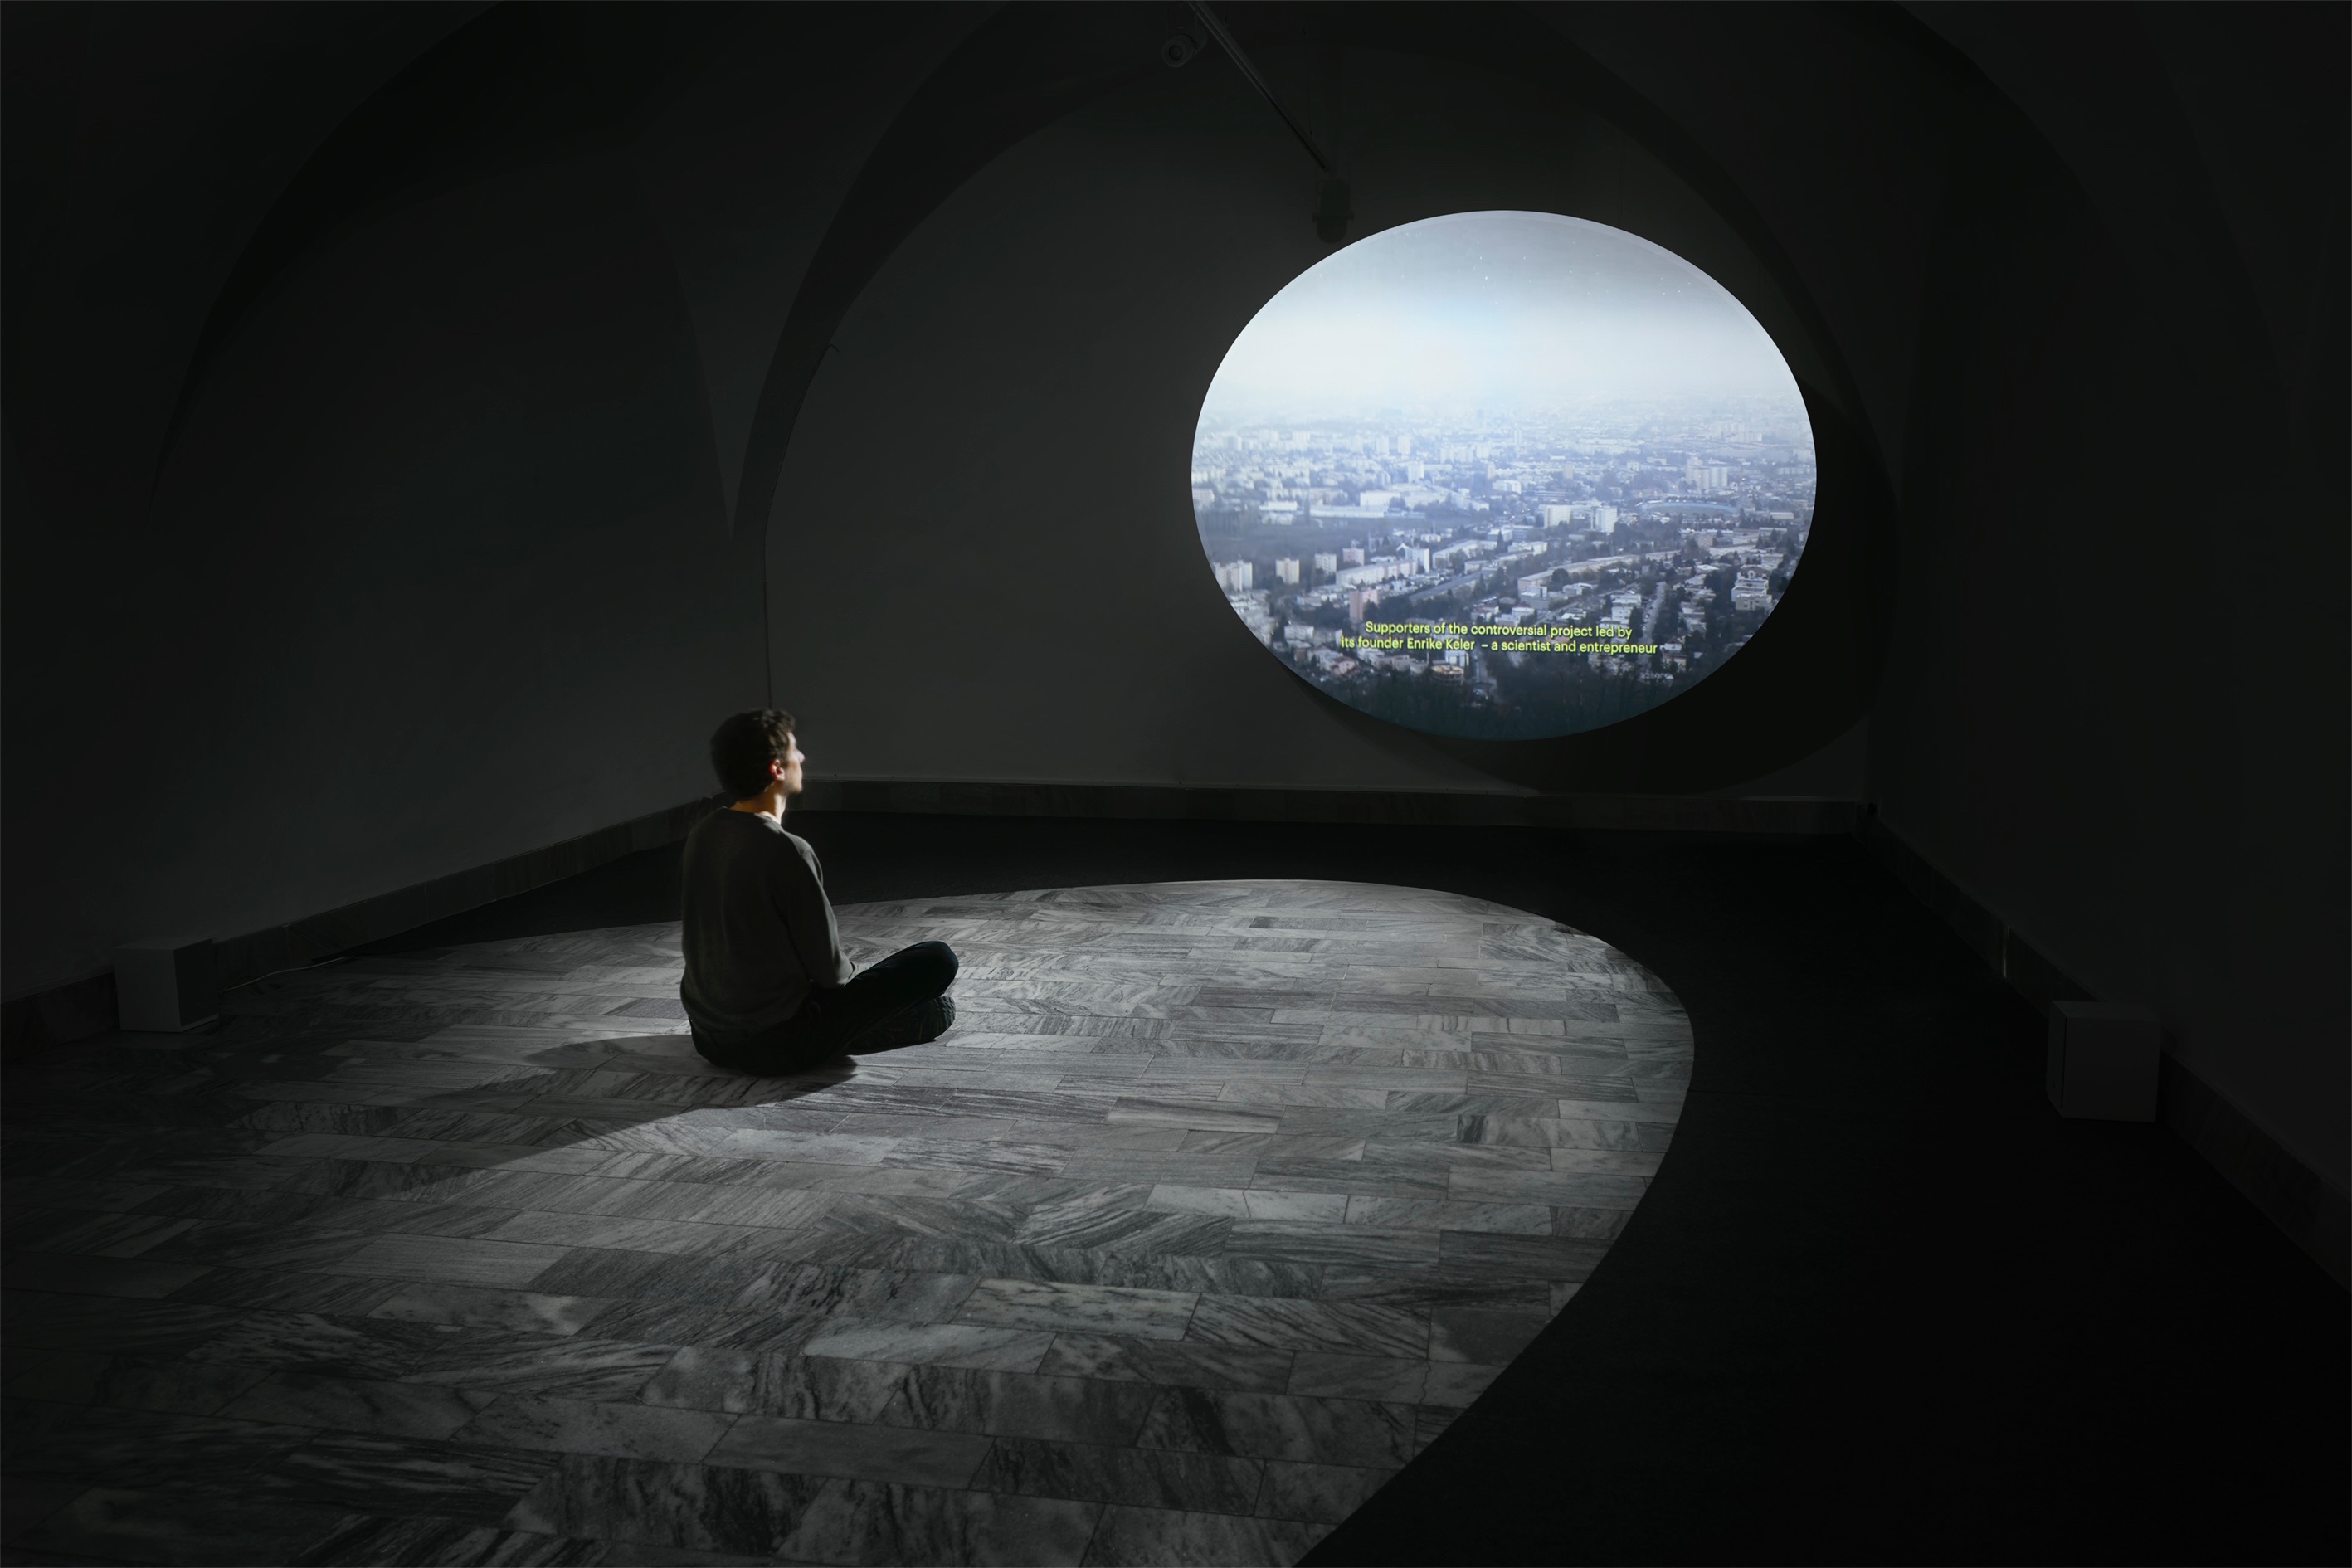 A man sitting in the gallery in front of an ellipse-shaped projection on a marble floor surrounded by a black ellipse-shaped carpet.